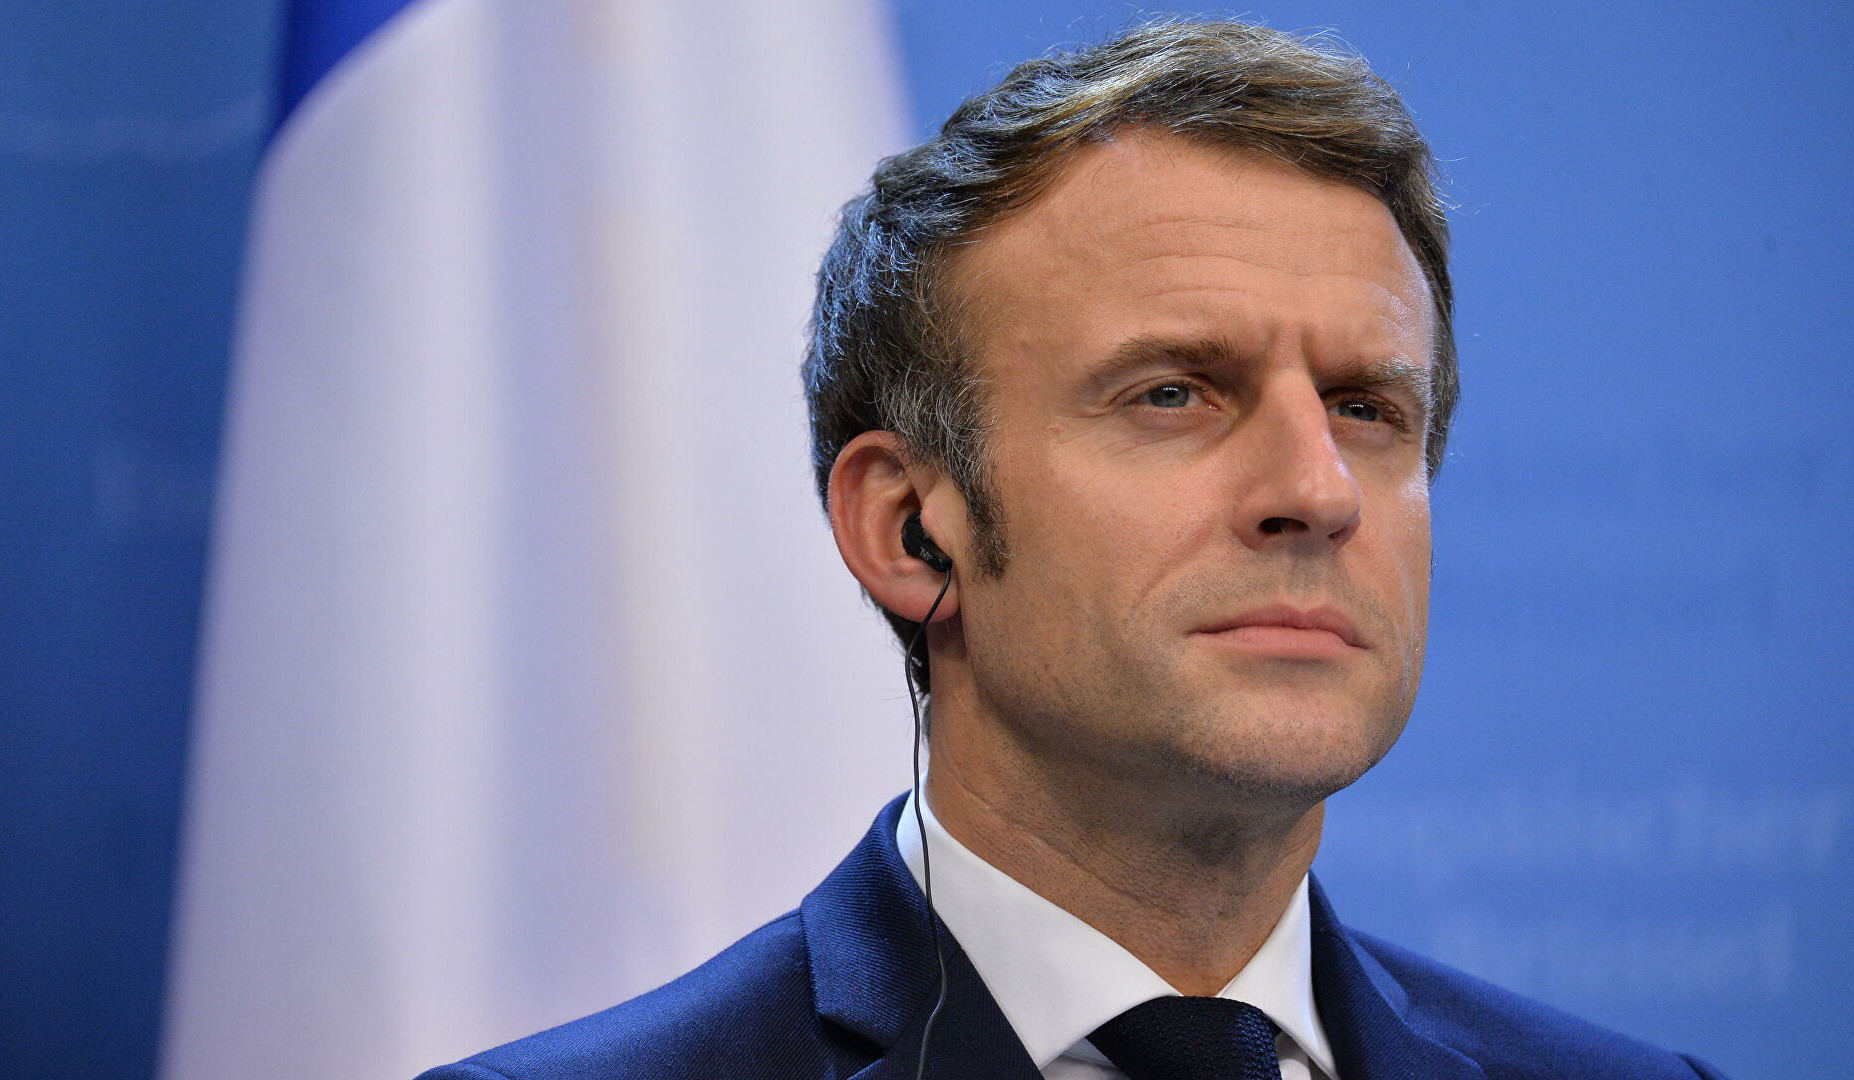 It is normal to respond to request of sovereign country: Macron on supply of French weapons to Armenia